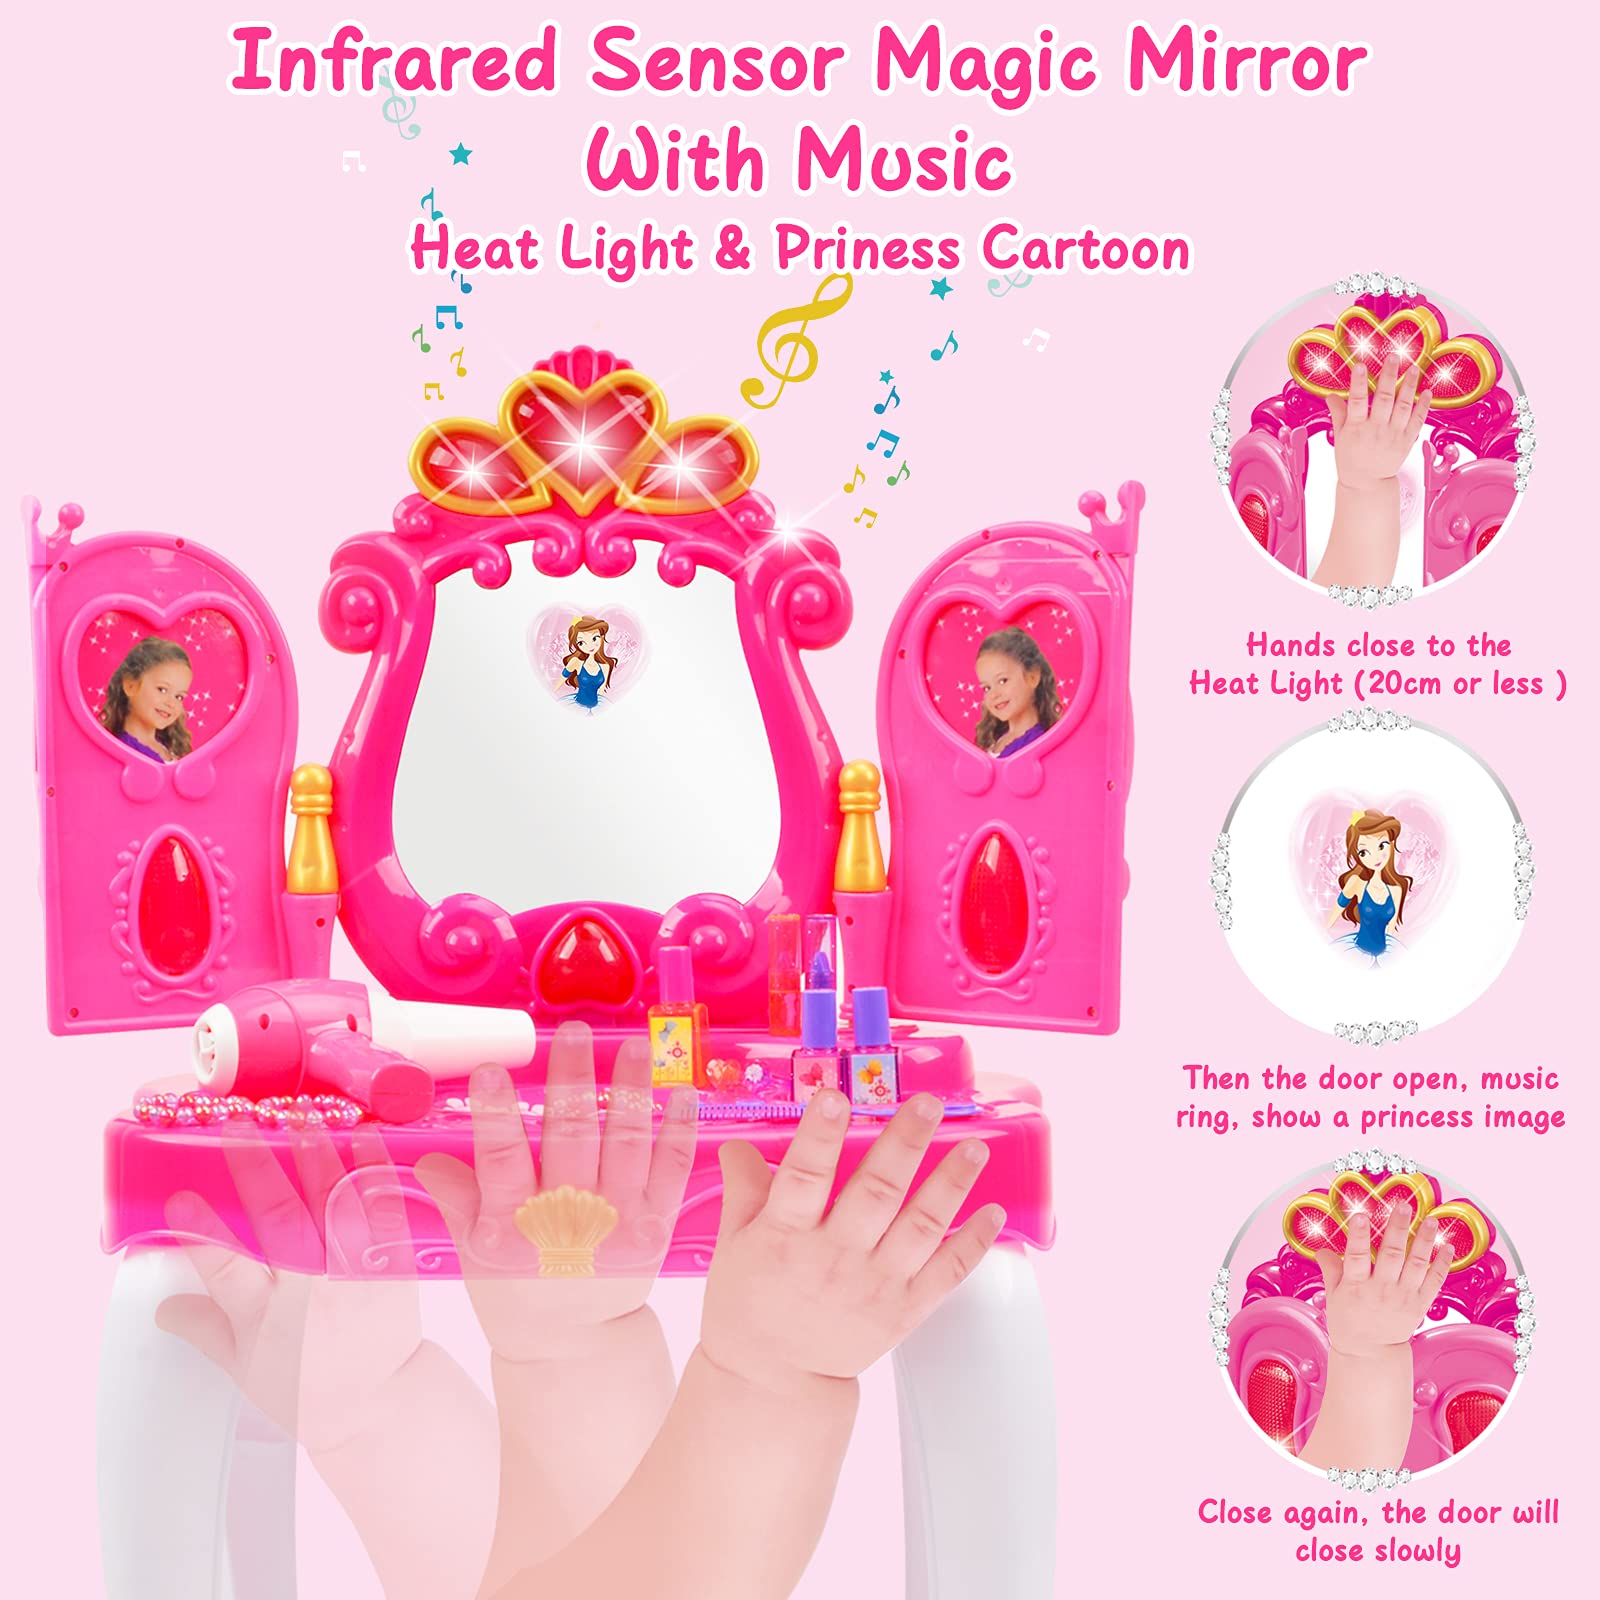 Ylovetoys Kids Vanity Makeup Table for Little Girl, Toddler Princess Vanity Play Toy Set with Mirror and Stool, Lights, Music Sound, Beauty Fantasy Dress Up Set, Gift for Little Girls 3-5 Years Old